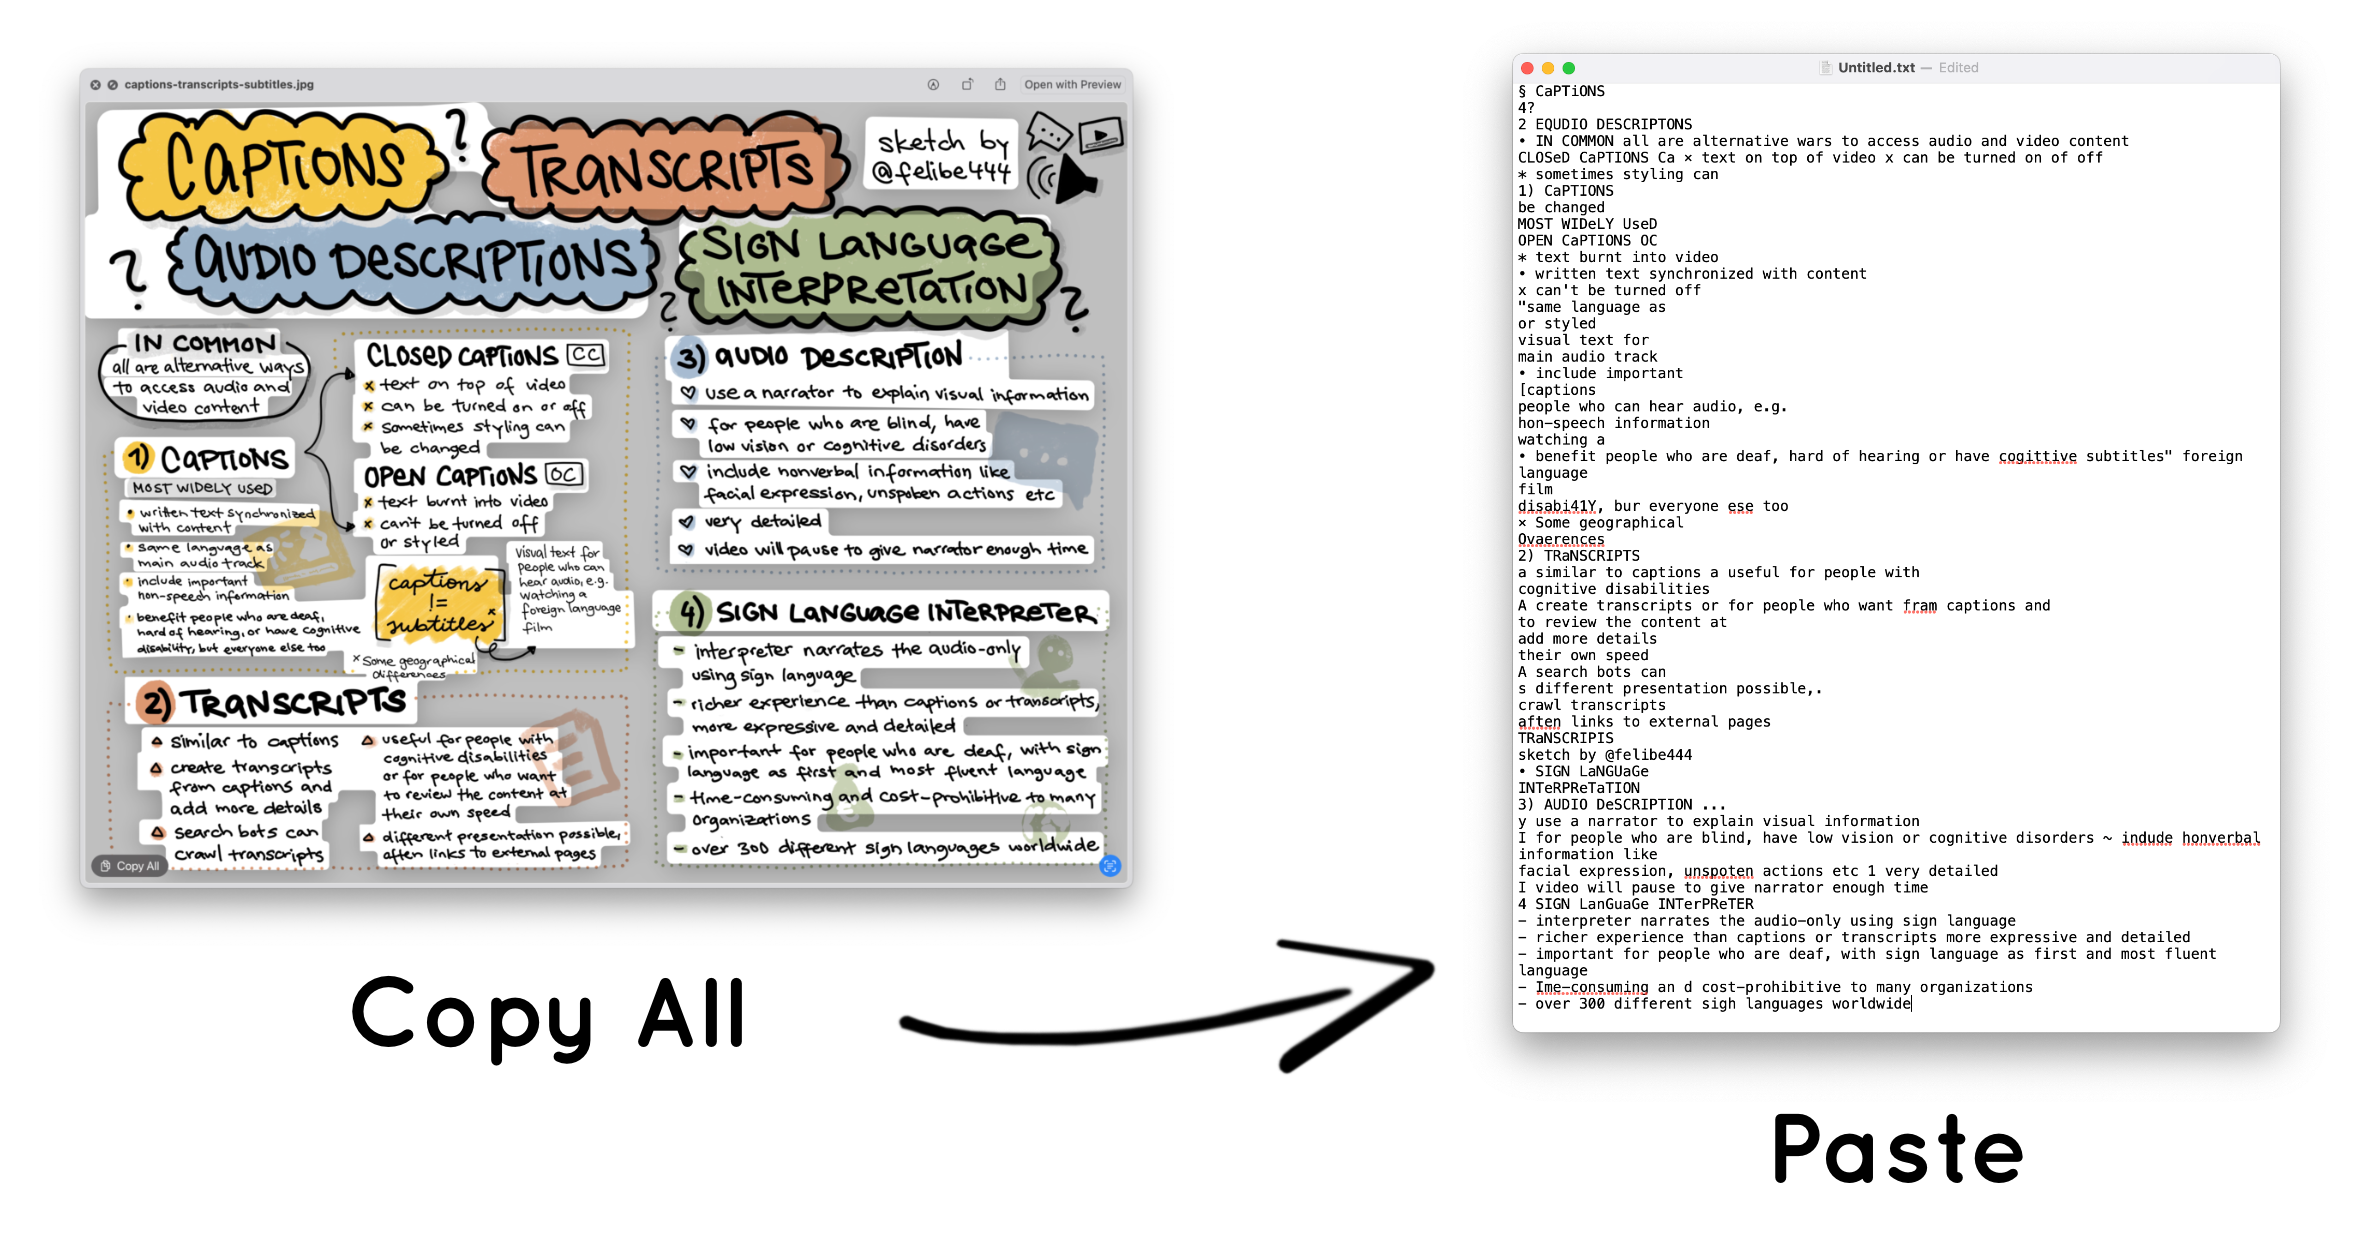 Two screenshots next to each other. The first one shows Preview app with one of my sketchnotes and the selected text from the image. There is a text reading 'Copy All' under the screenshot with an arrow to the next screenshot which is a text editor some text in it. There is a text reading 'Paste' under the screenshot.